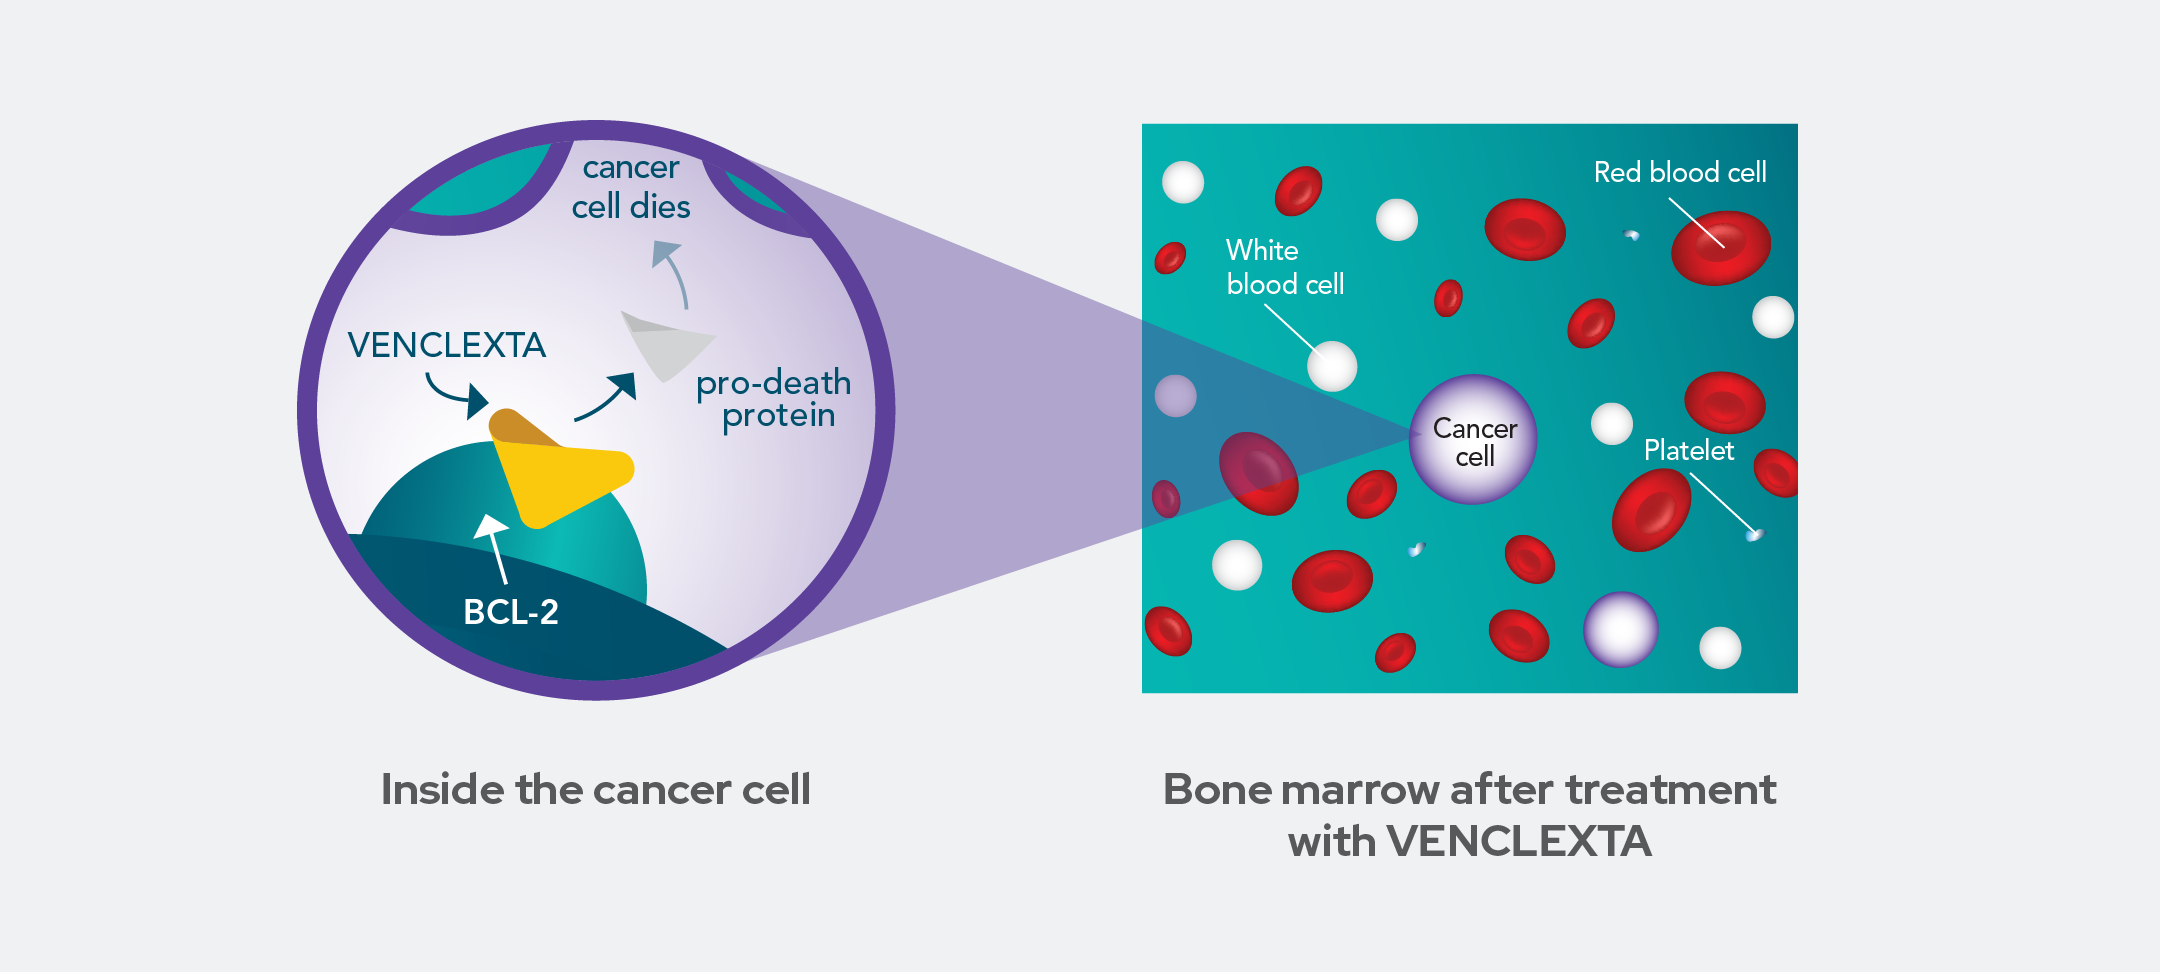 Illustrations of the inside of a cancer cell and bone marrow after treatment with venclexta